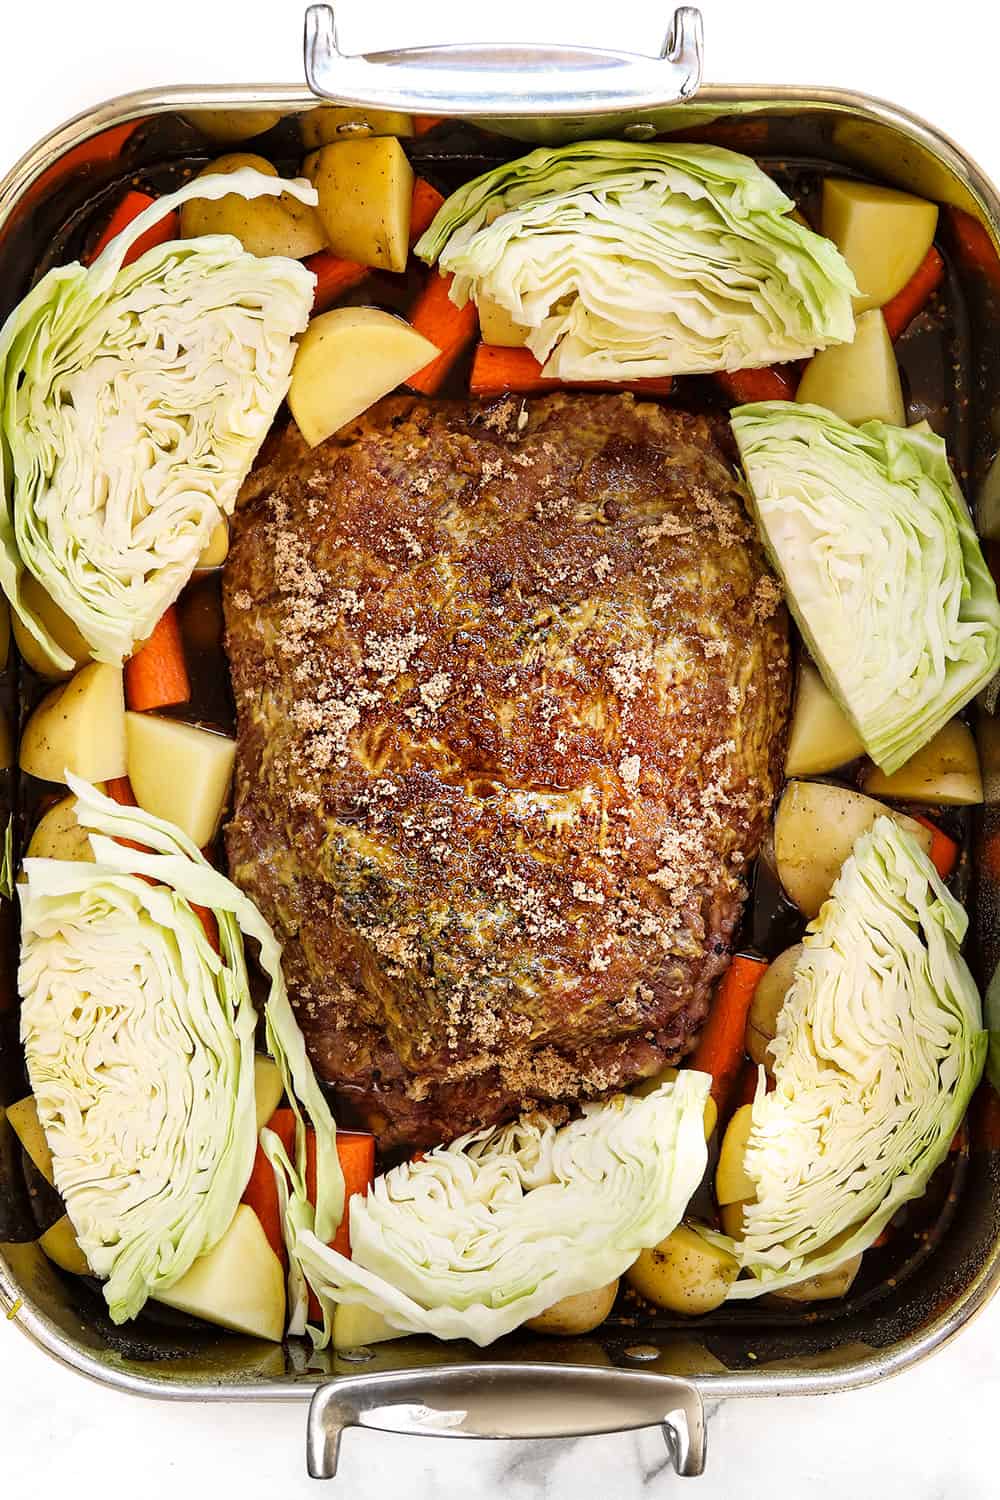 showing how to make oven corned beef by adding corned beef brisket to a roasting pan and surrounding by carrots, potatoes and sliced cabbage